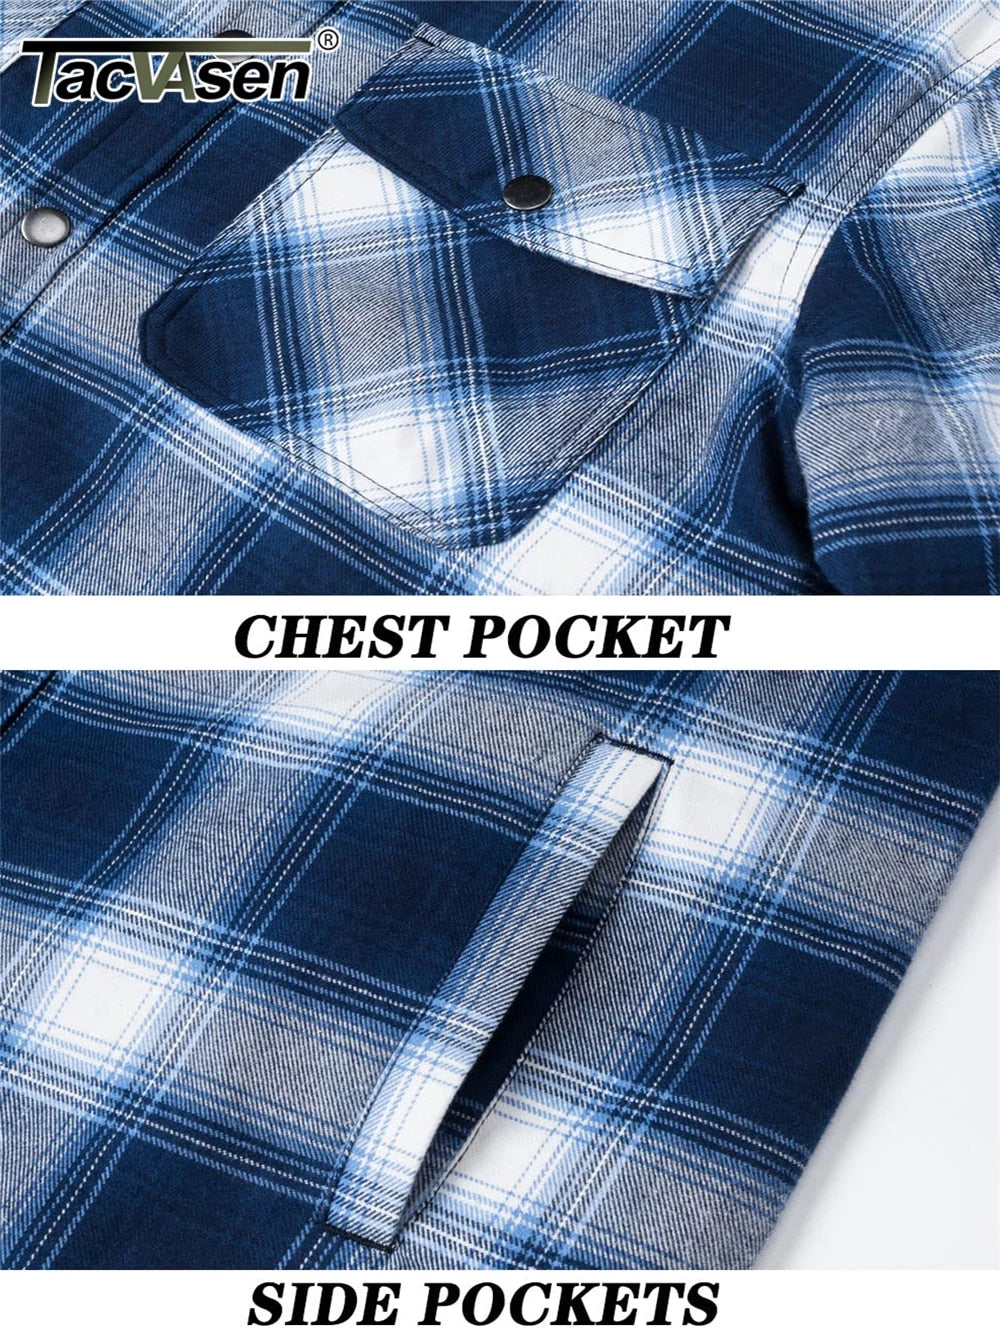 blue and white plaid jacket with chest pocket and side hand pockets. 